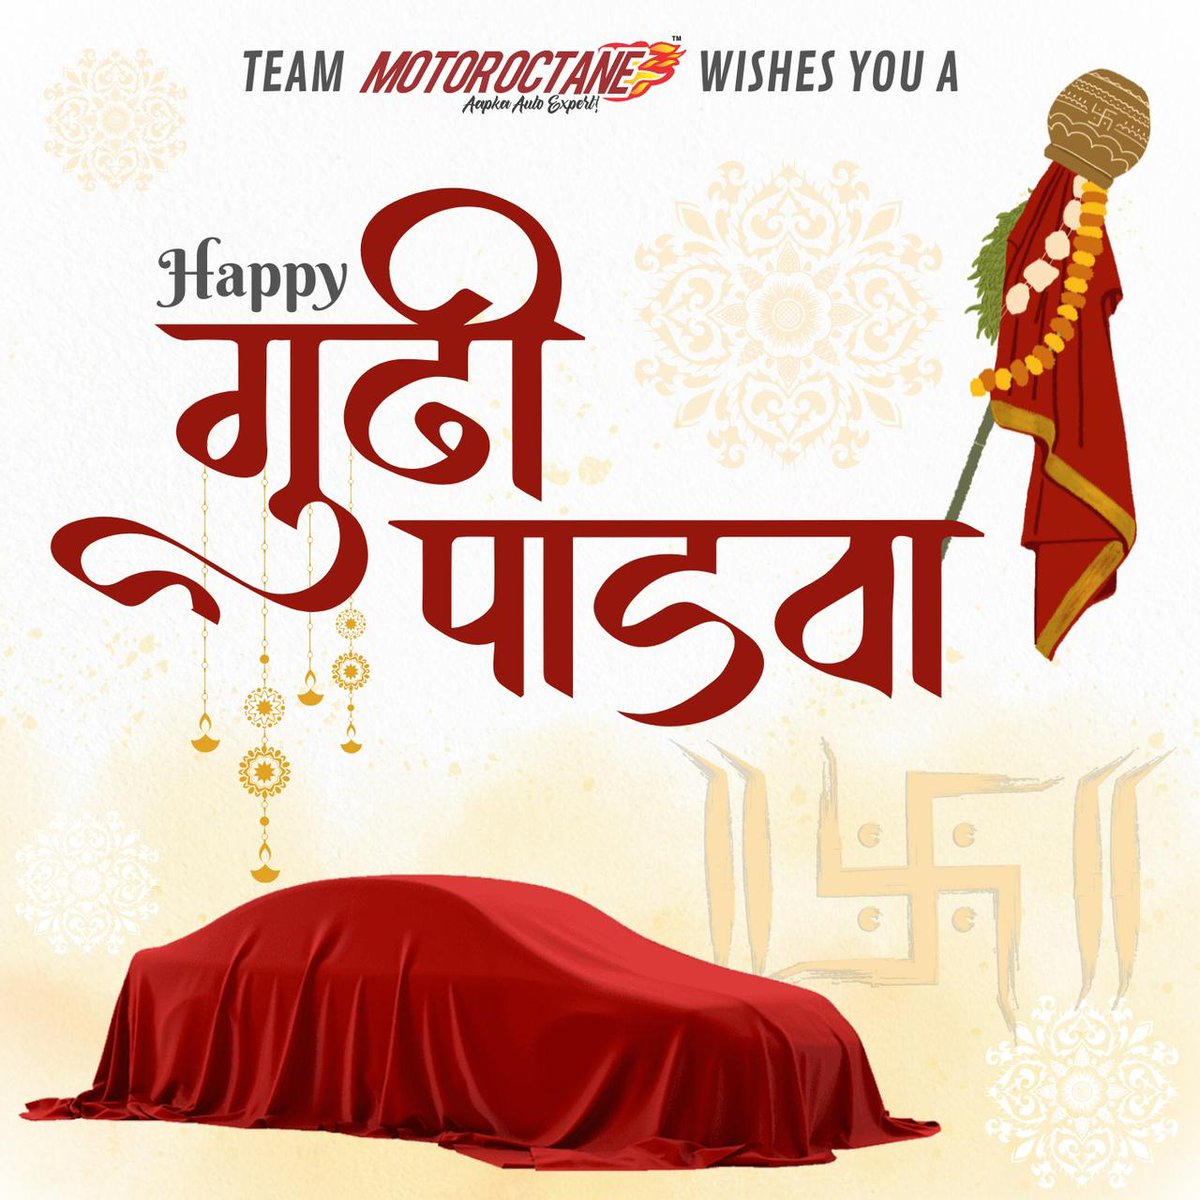 May the almighty bless you with joy, health, prosperity, wealth and happiness this year. Happy Gudi Padwa from team MotorOctane!